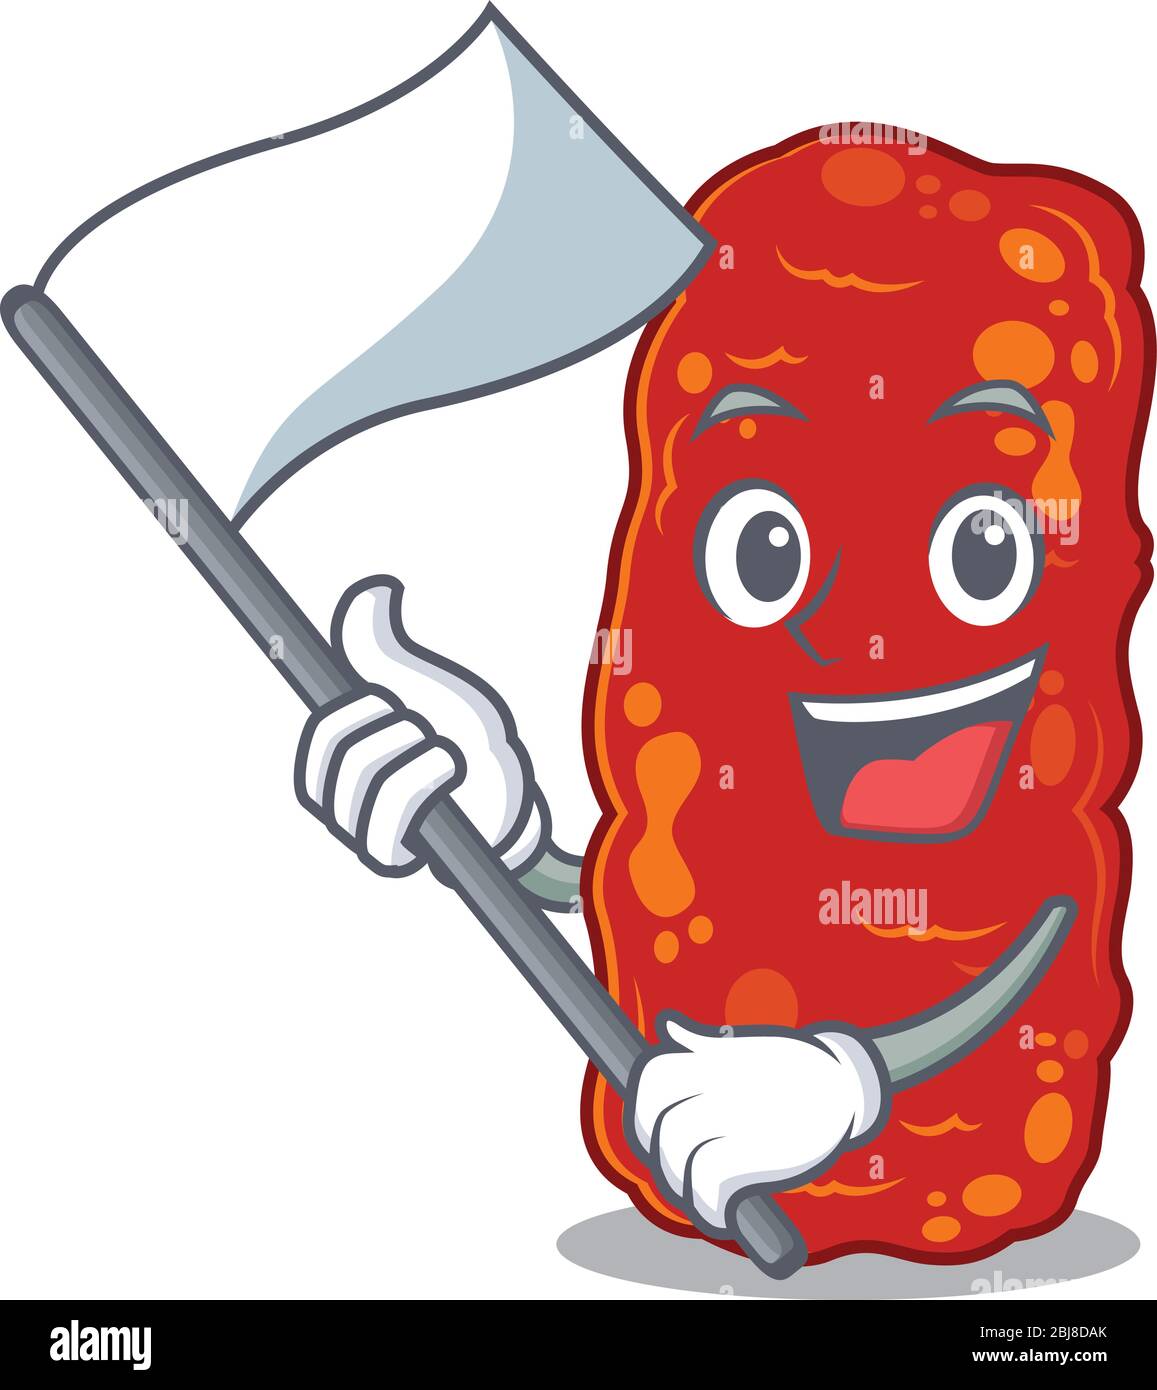 A nationalistic acinetobacter bacteria mascot character design with flag Stock Vector